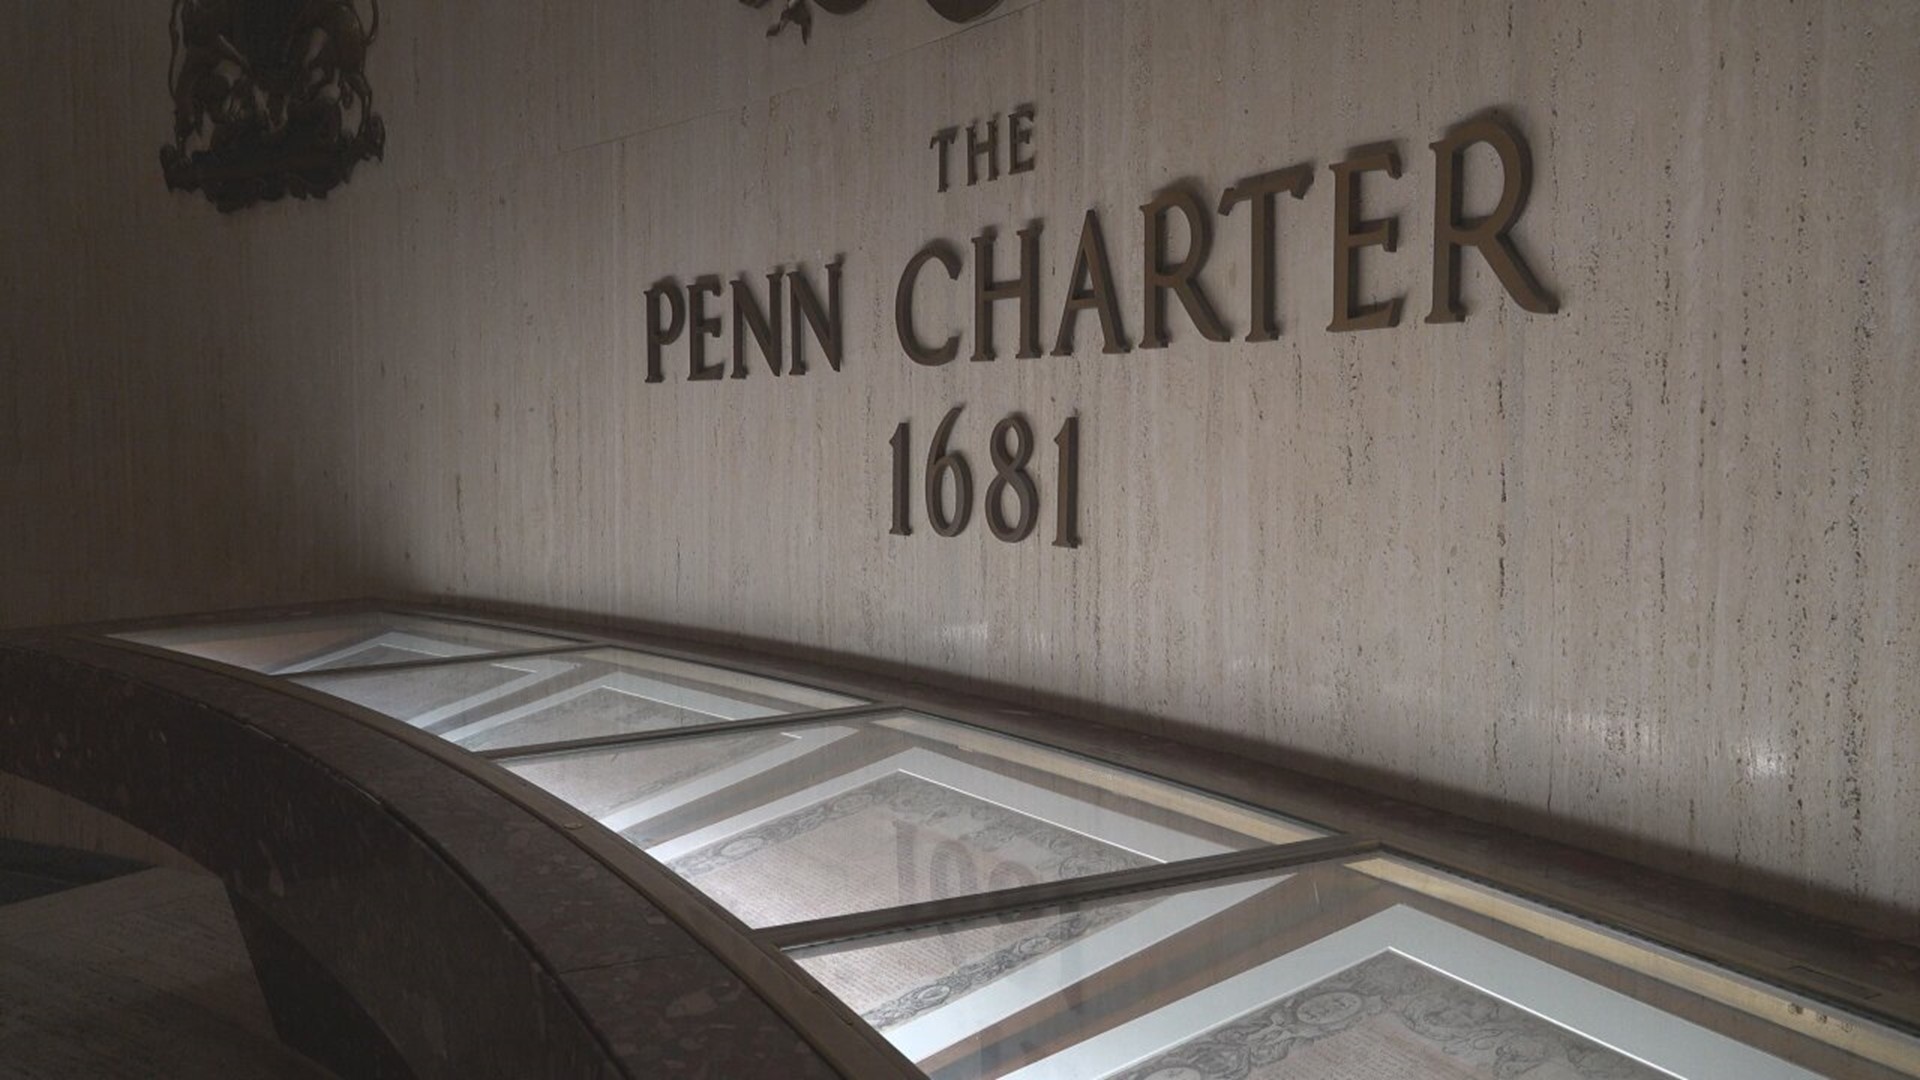 Museums and historical sites on the Pennsylvania Trails of History will be free for visitors on Sunday to celebrate Pa.'s Charter Day.